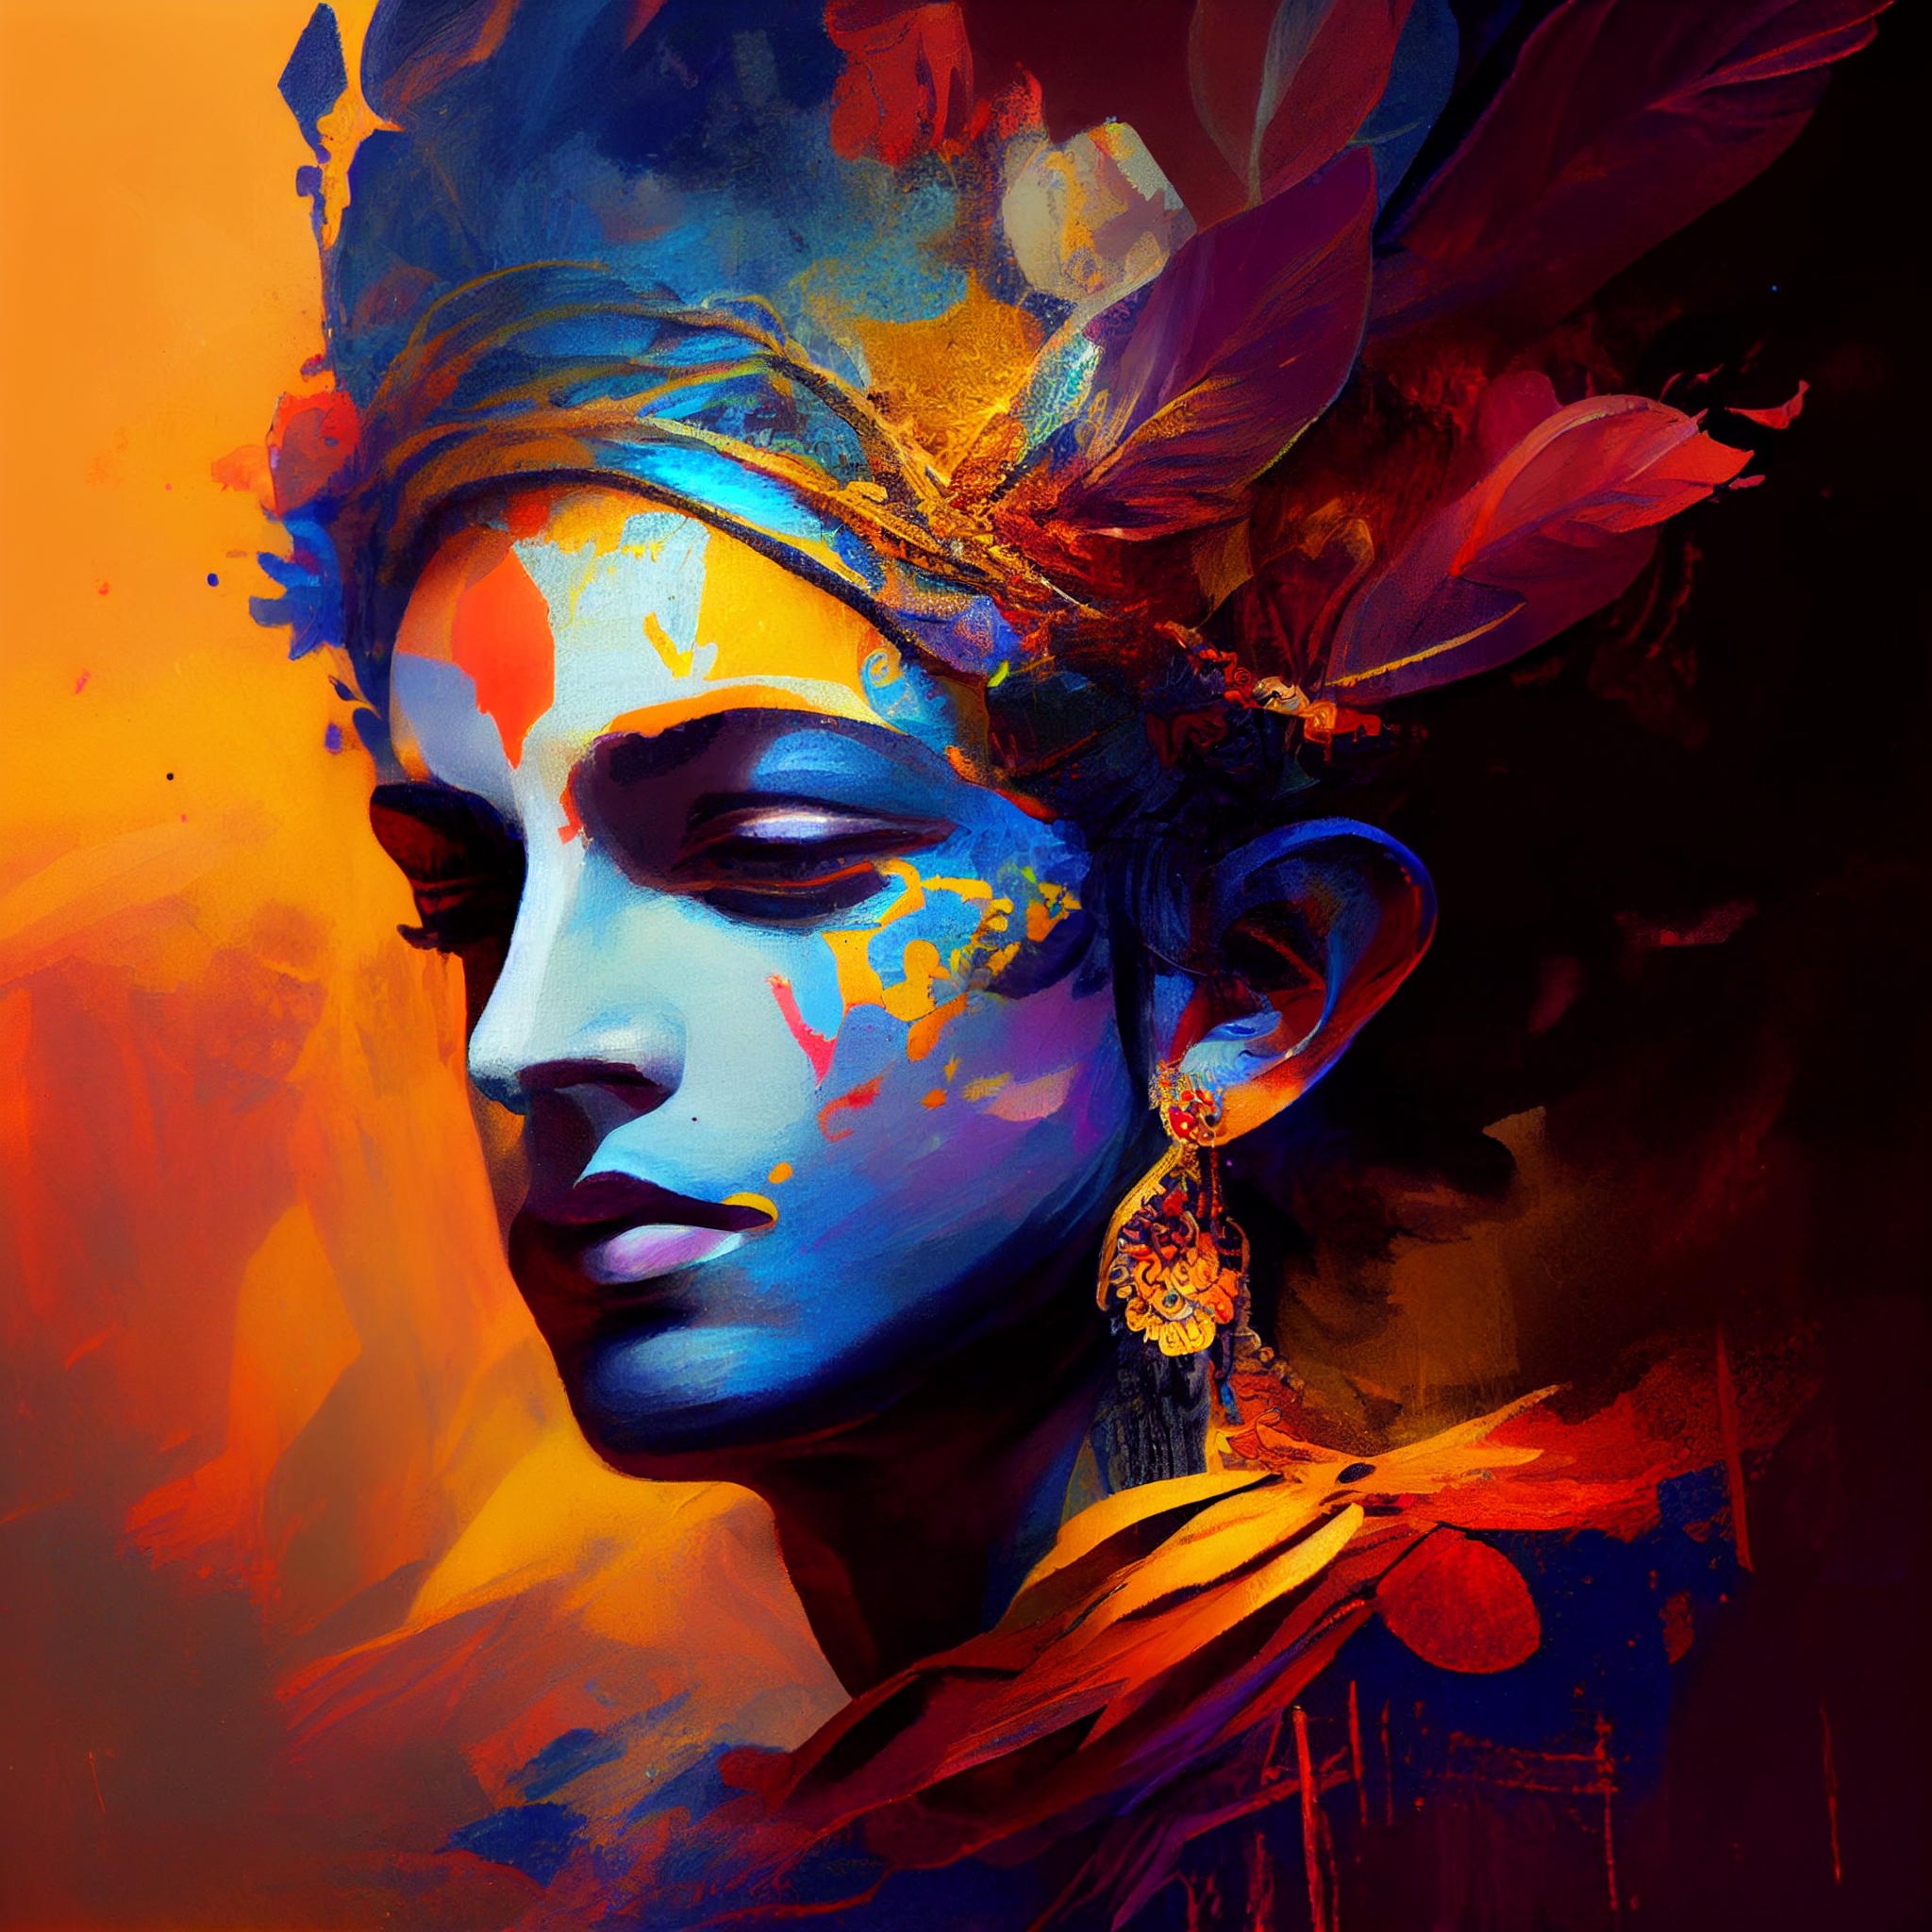 Divine Hues: Oil Painting Print of Lord Krishna in Red, Yellow, and Blue - Perfect for Living Room and Gifting